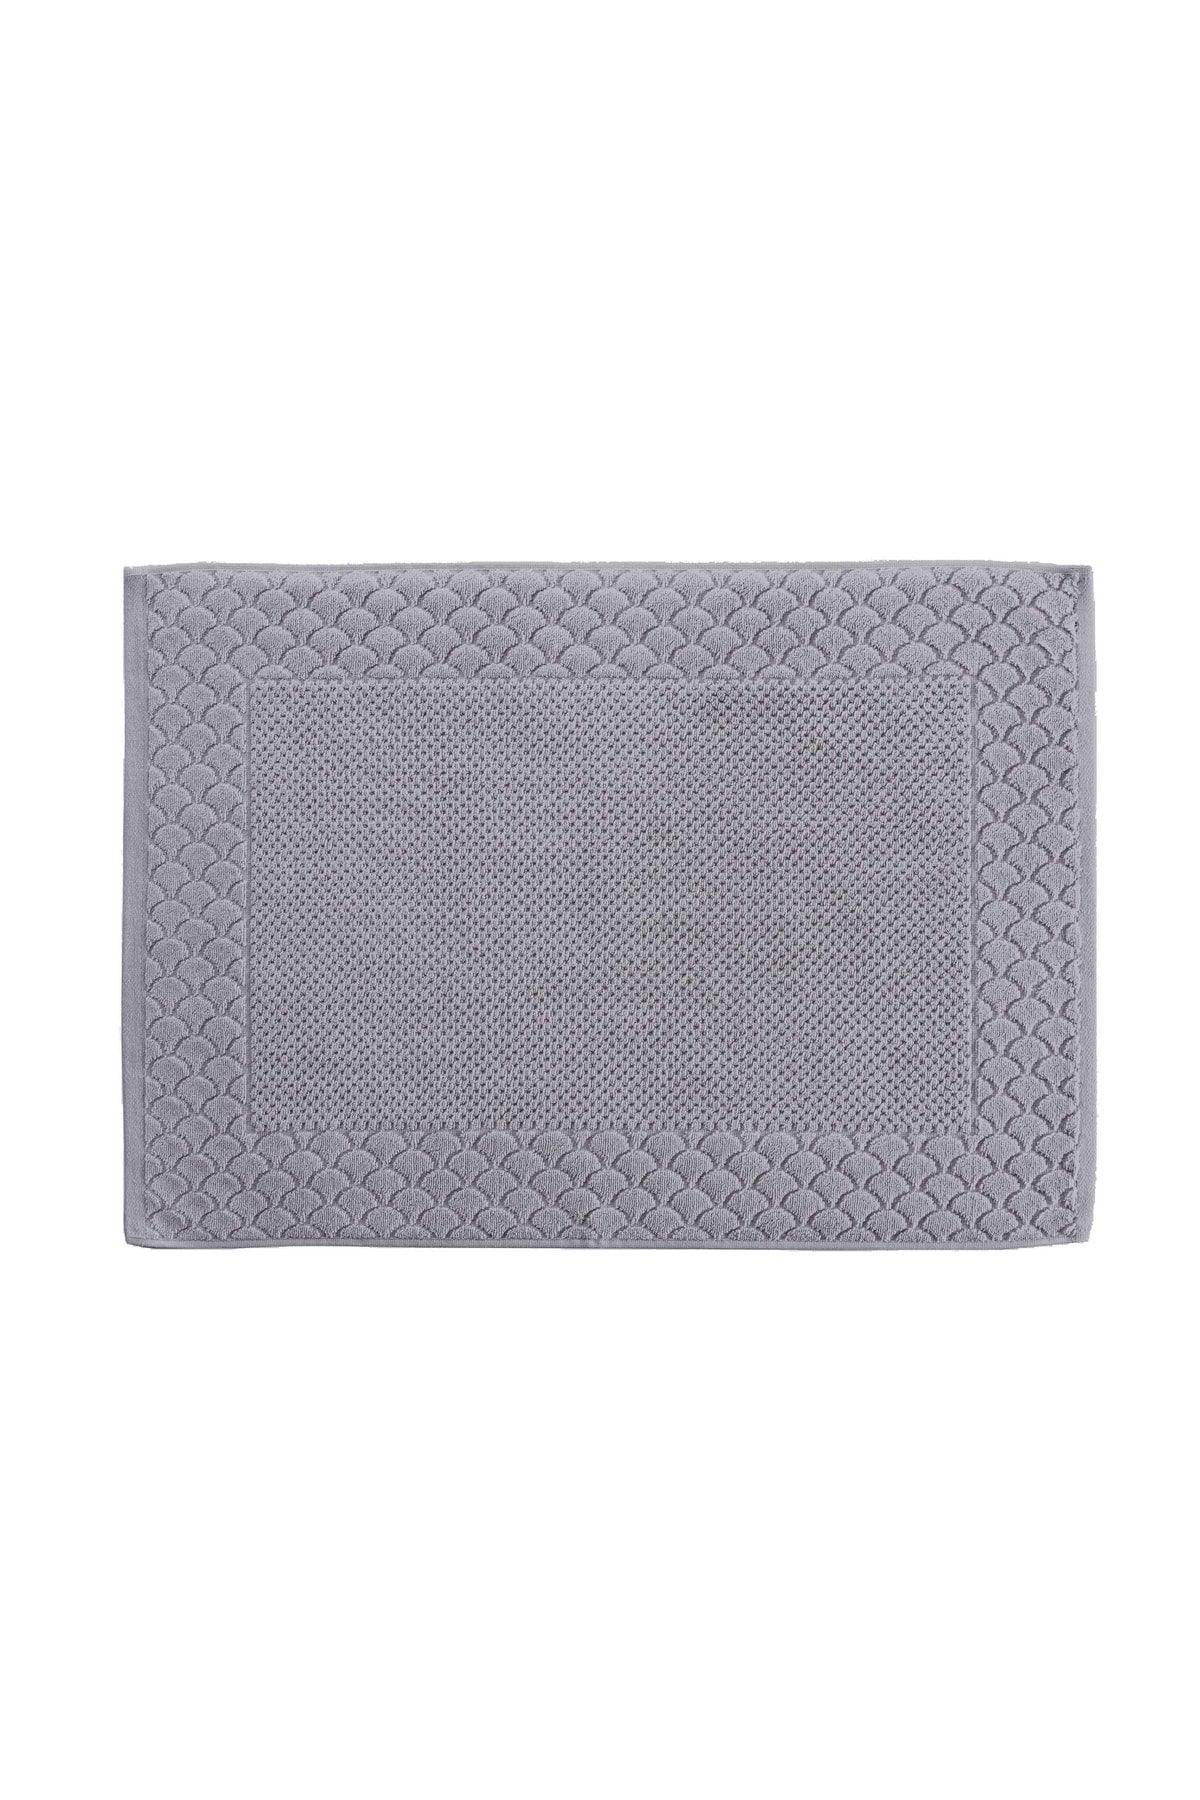 | Alana | Extra Soft Cotton Rice Knitted Foot Towel - Swordslife